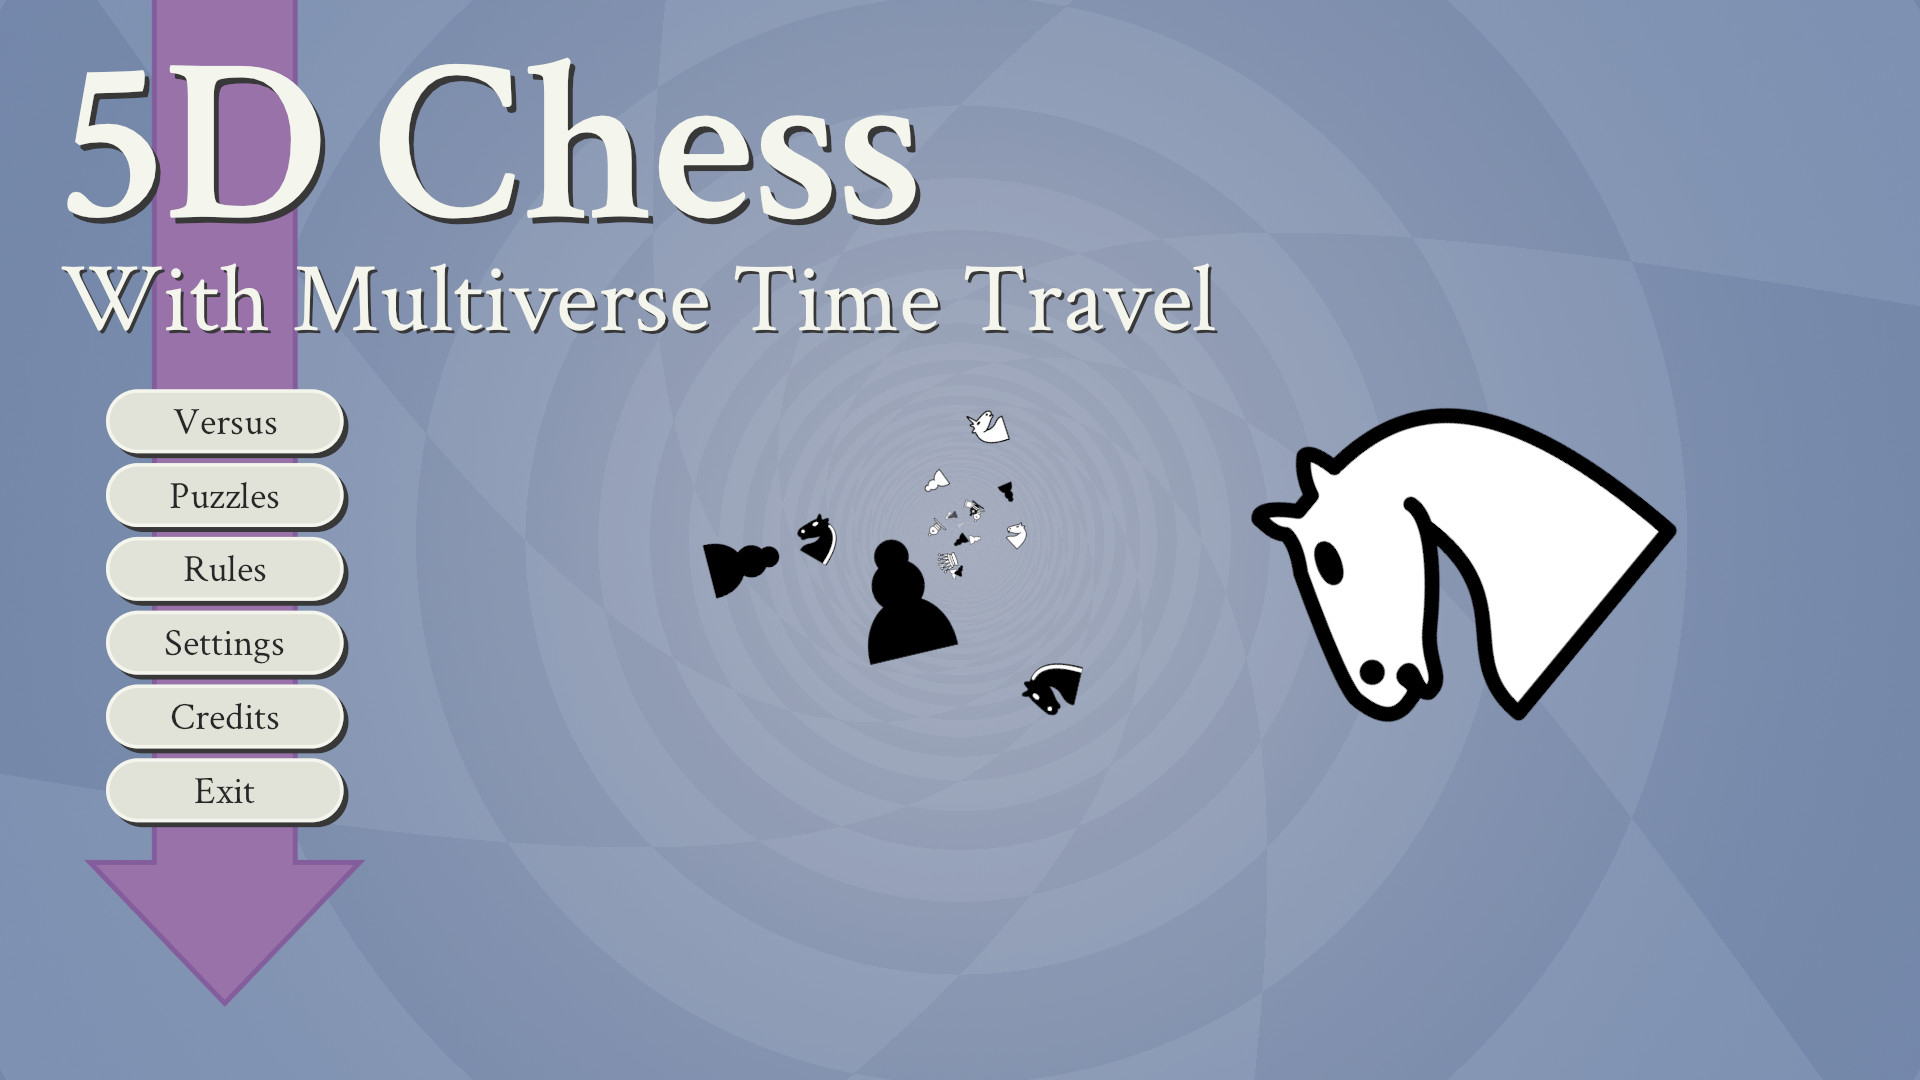 5D Chess With Multiverse Time Travel on Steam